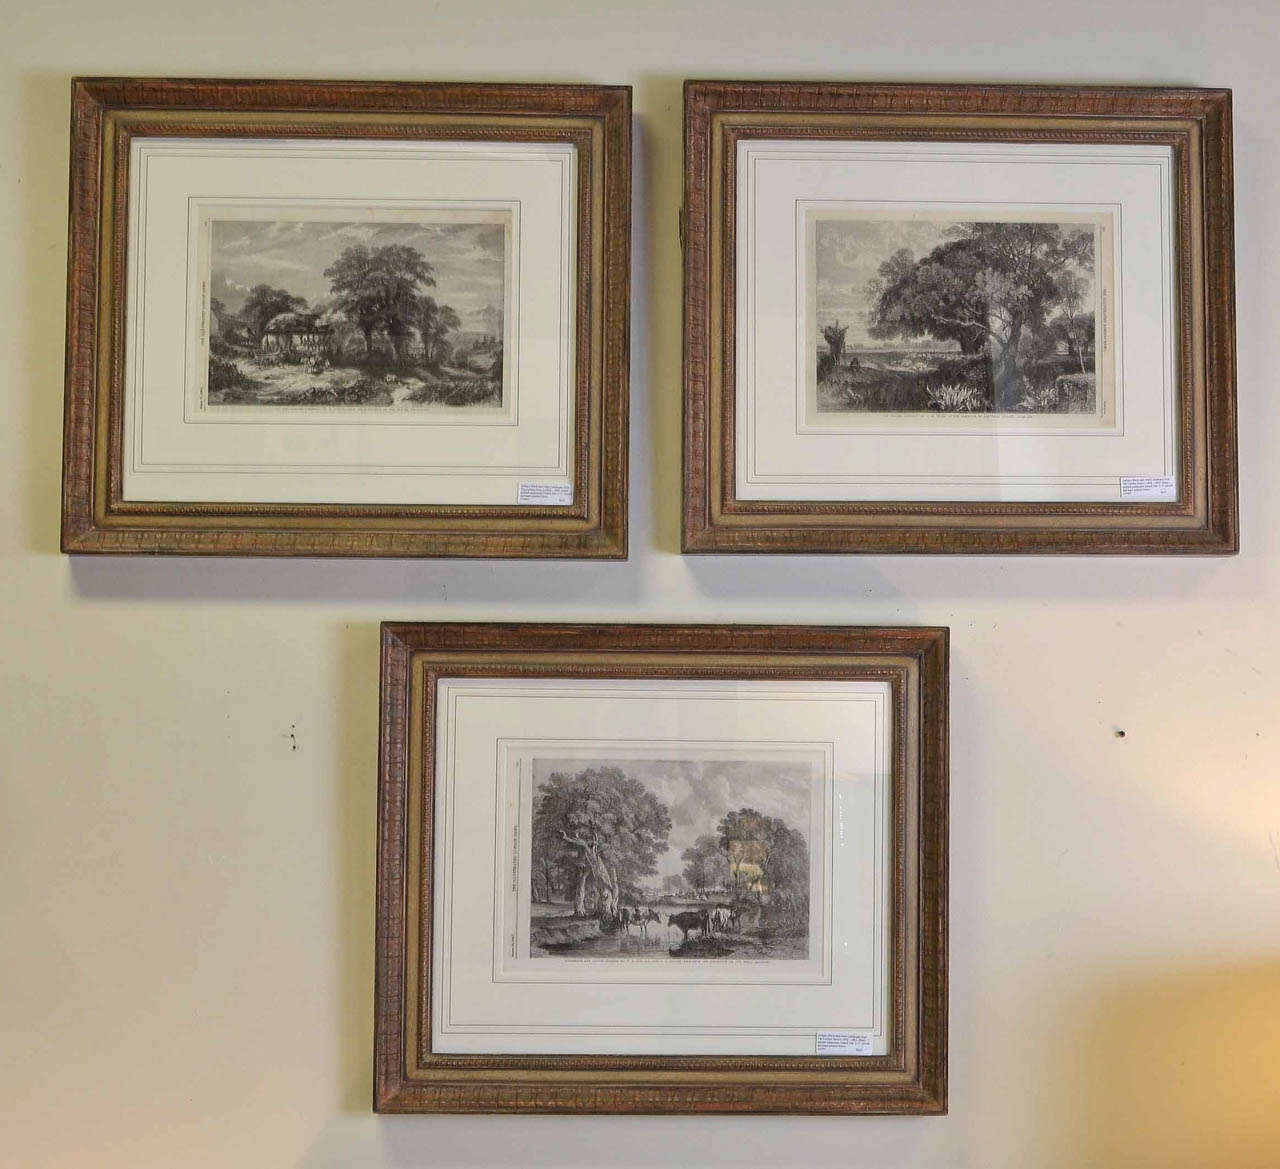 This is a group of 3 antique black and white landscapes from the London Newsc 1856-1865.  They are in a 2.25